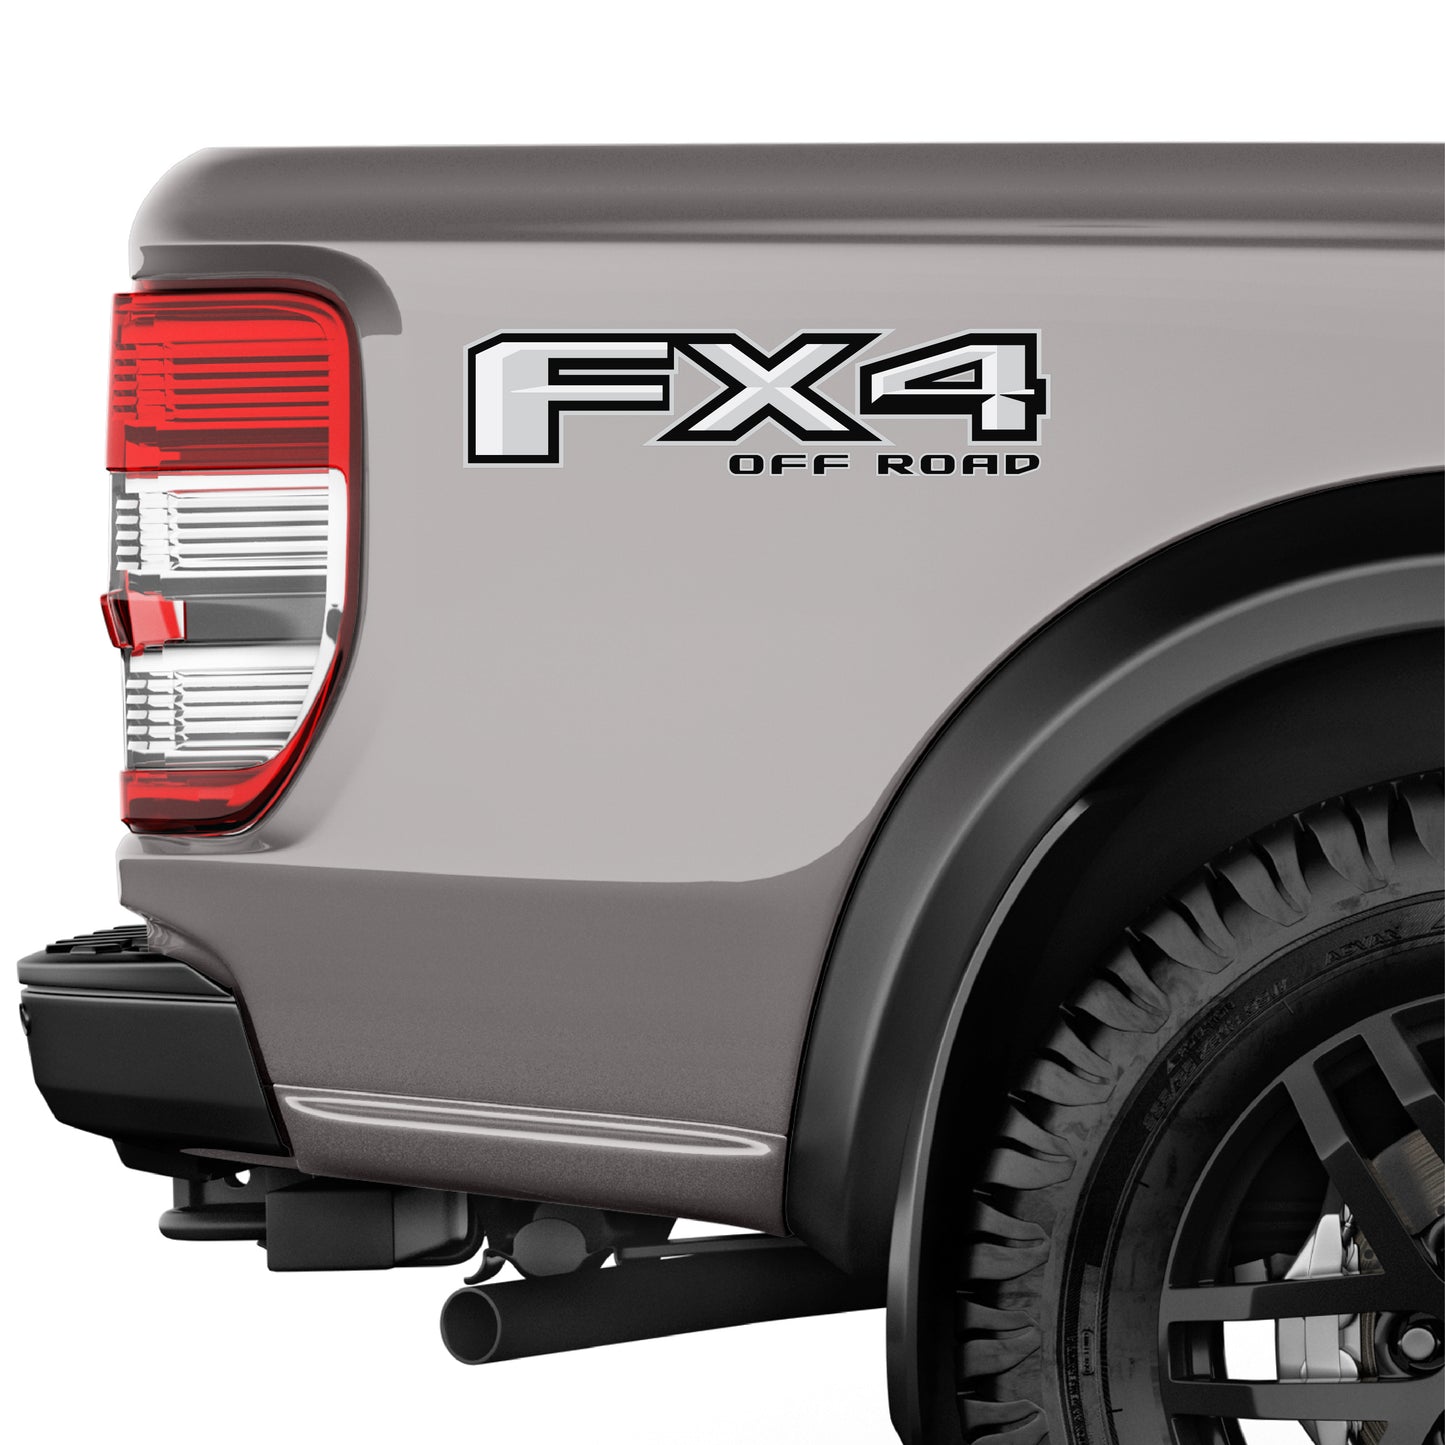 FX4 Off Road Decal Replacement Sticker Ford F 150 Bedside Emblem for 4x4 Truck Super Duty F250 F350 F450 - TiresFX